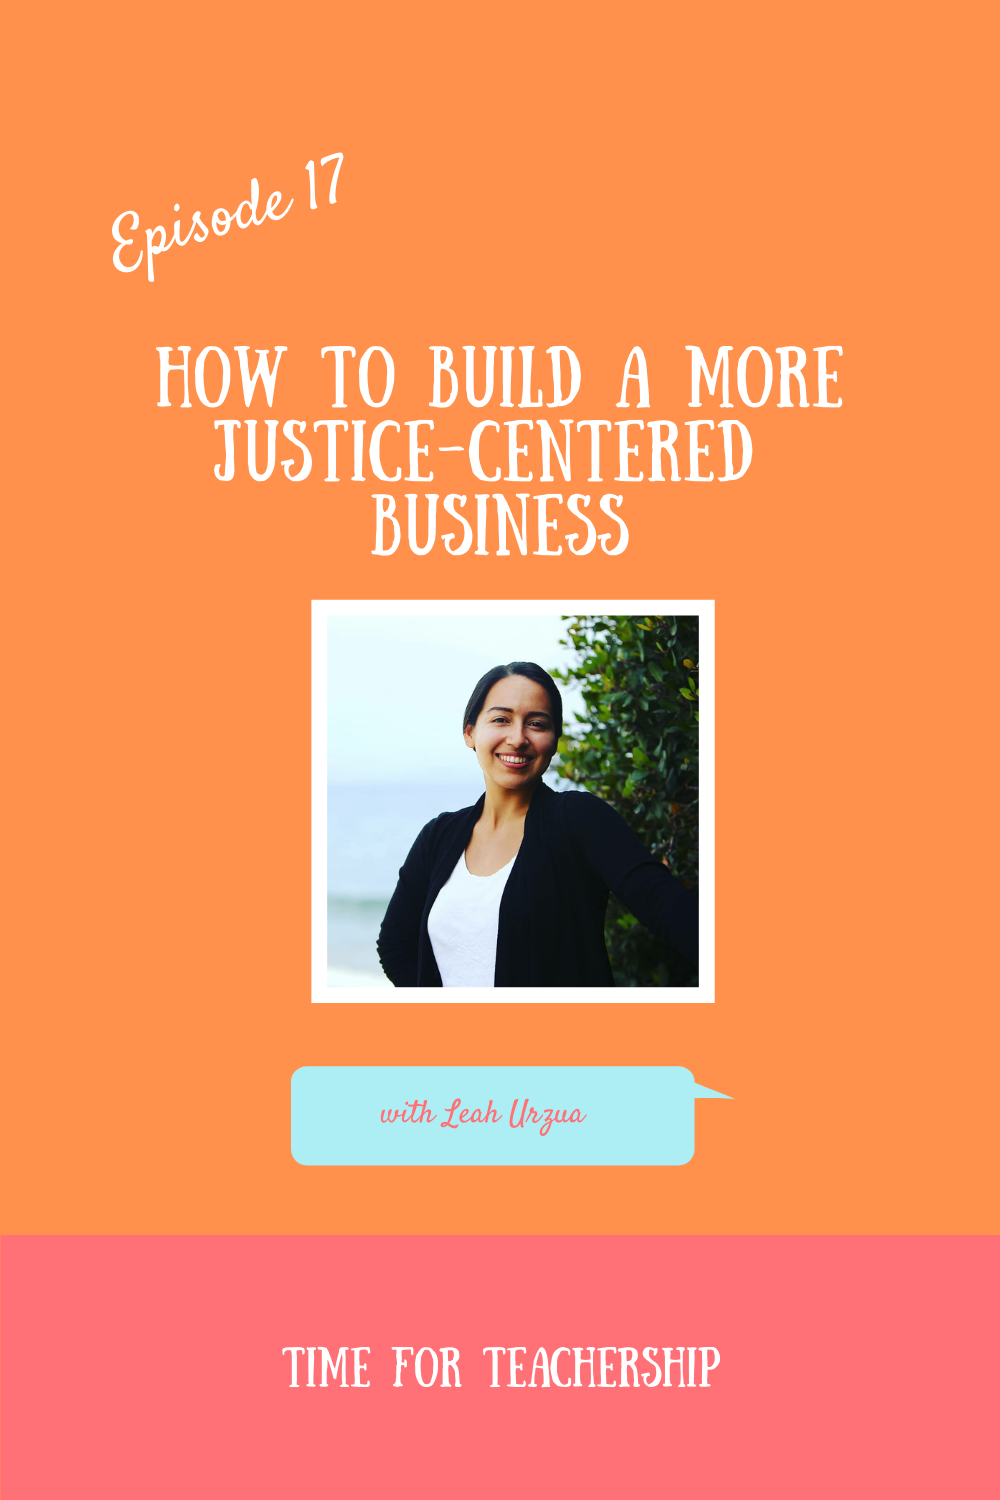 17. How to Have a Justice-Centered Business with Leah Urzua. To really have a business that centers justice, we have to ask ourselves how much effort we’re putting in to be inclusive, equitable, and anti-racist. Check out the Time for Teachership blog post for steps you can take to invite justice in your business and grab Leah’s helpful resource. For more tips on educational equity, sign up for weekly emails at bit.ly/lindsayletter